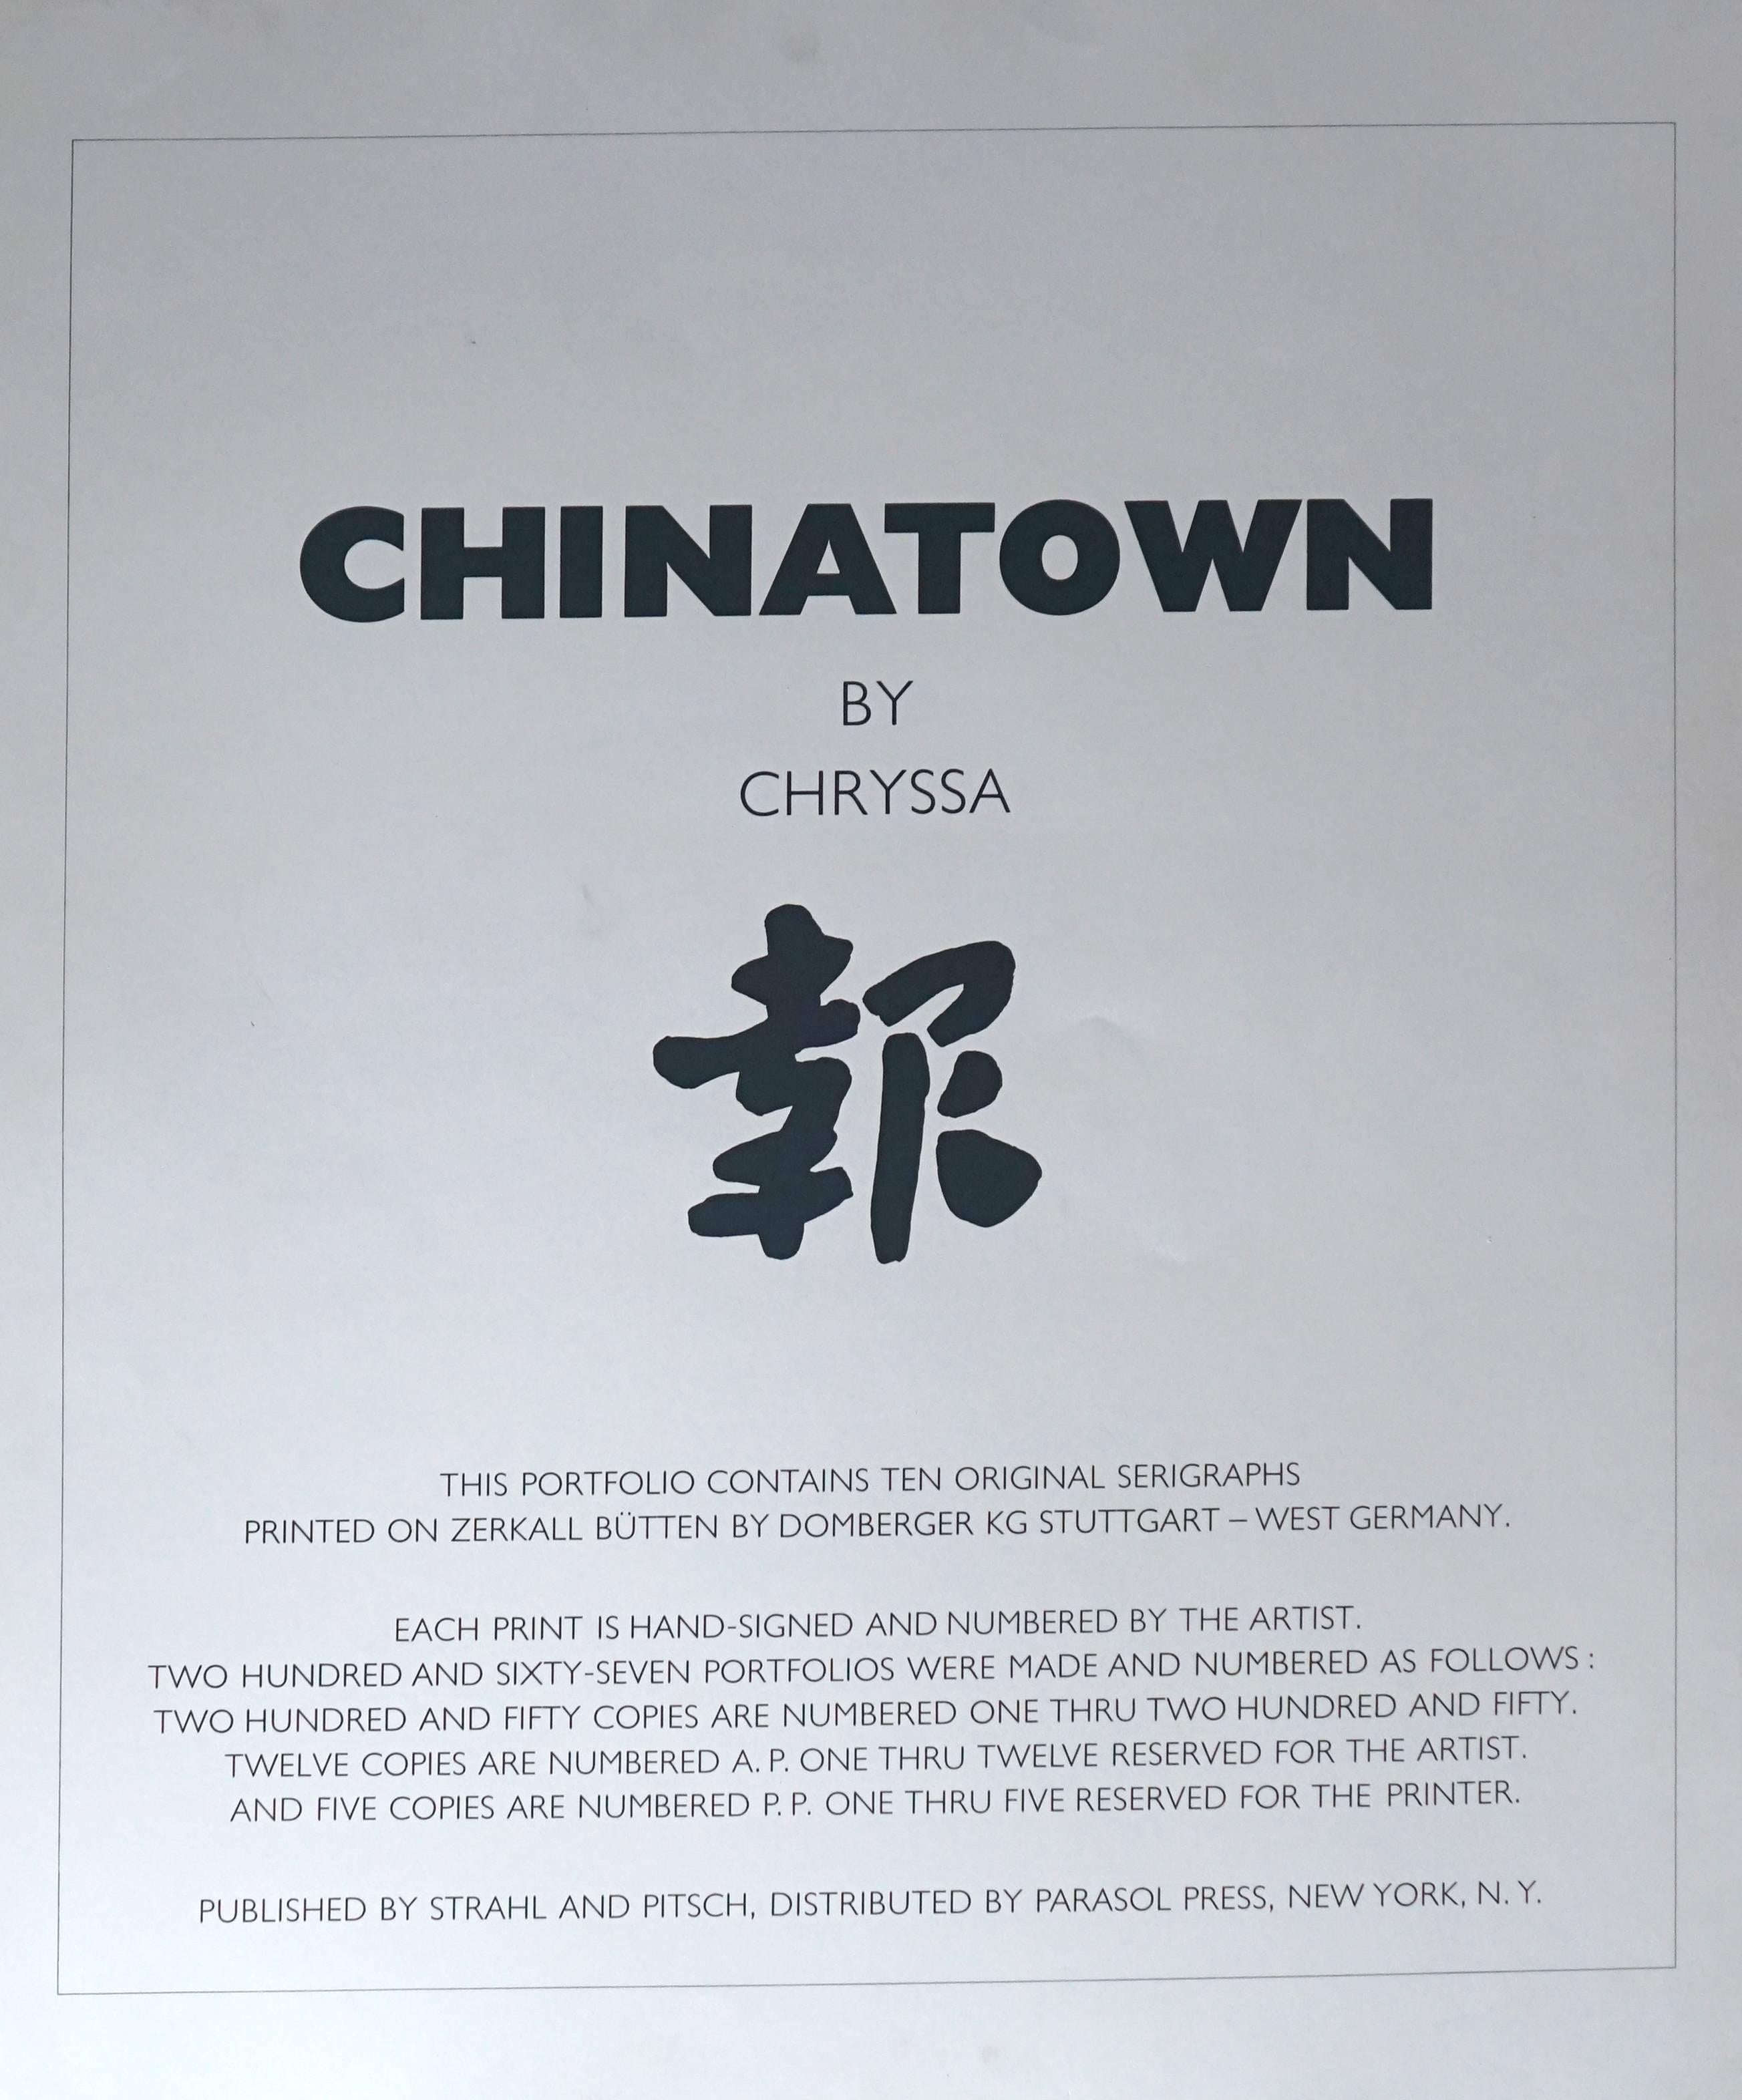 Artist: Chryssa (Greek, born 1933)
Chinatown Portfolio #7
Year: 1978
Medium: Screenprints on wove paper
Signed in pencil and numbered 97/250 
Edition: 250 
Dimension: 38 1/4 x 31 1/4in
Blindstamp of the publisher, Edition Domberger
Condition: